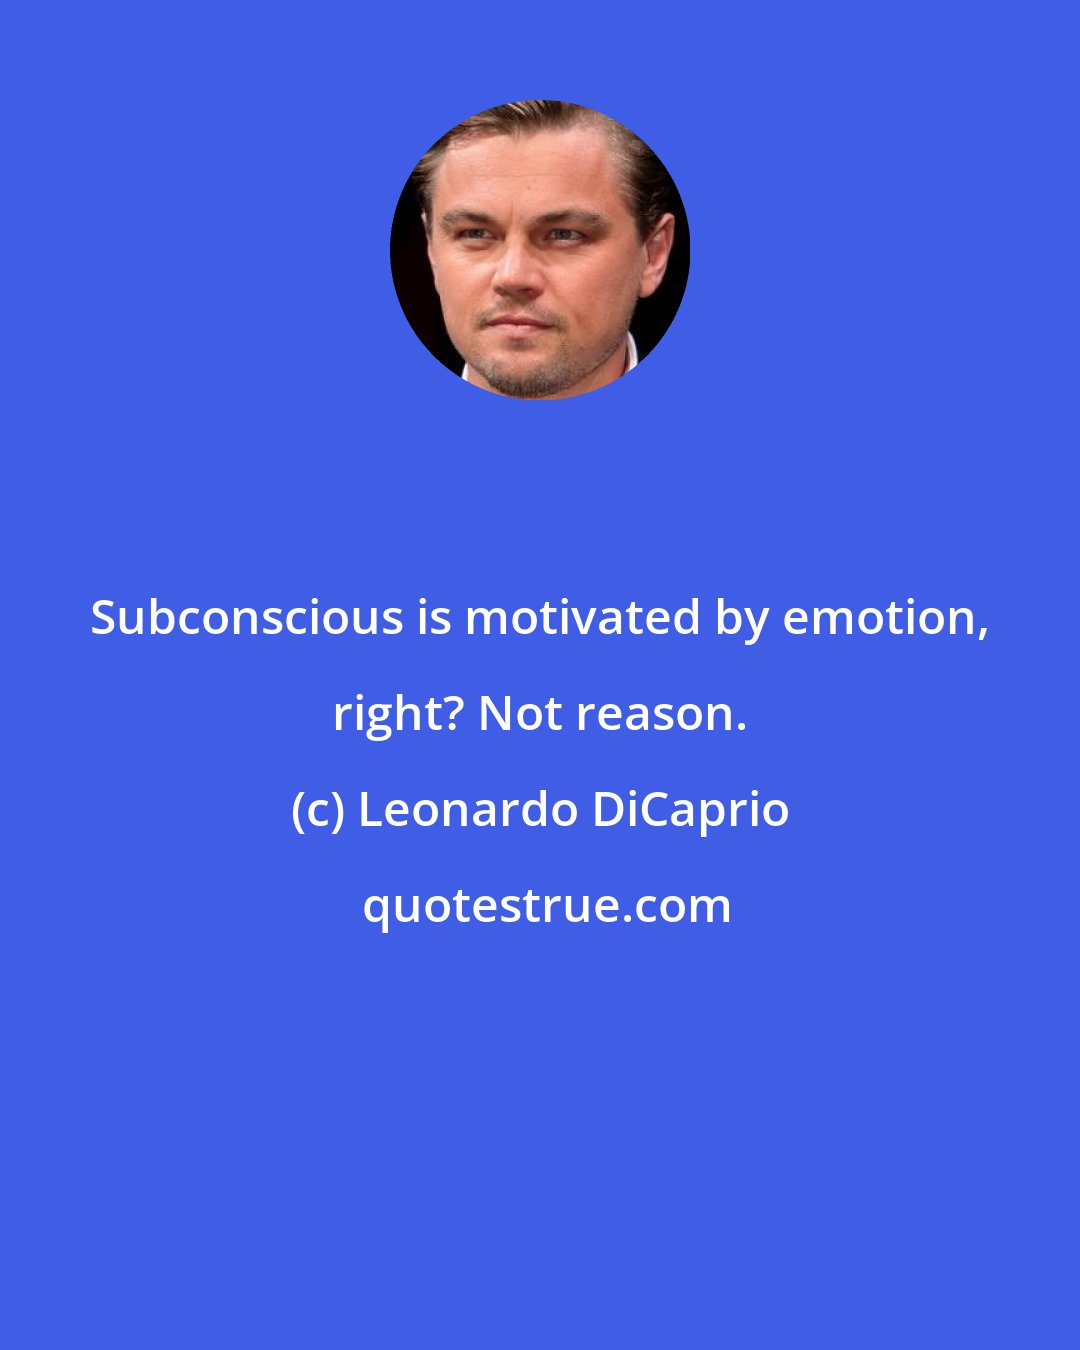 Leonardo DiCaprio: Subconscious is motivated by emotion, right? Not reason.